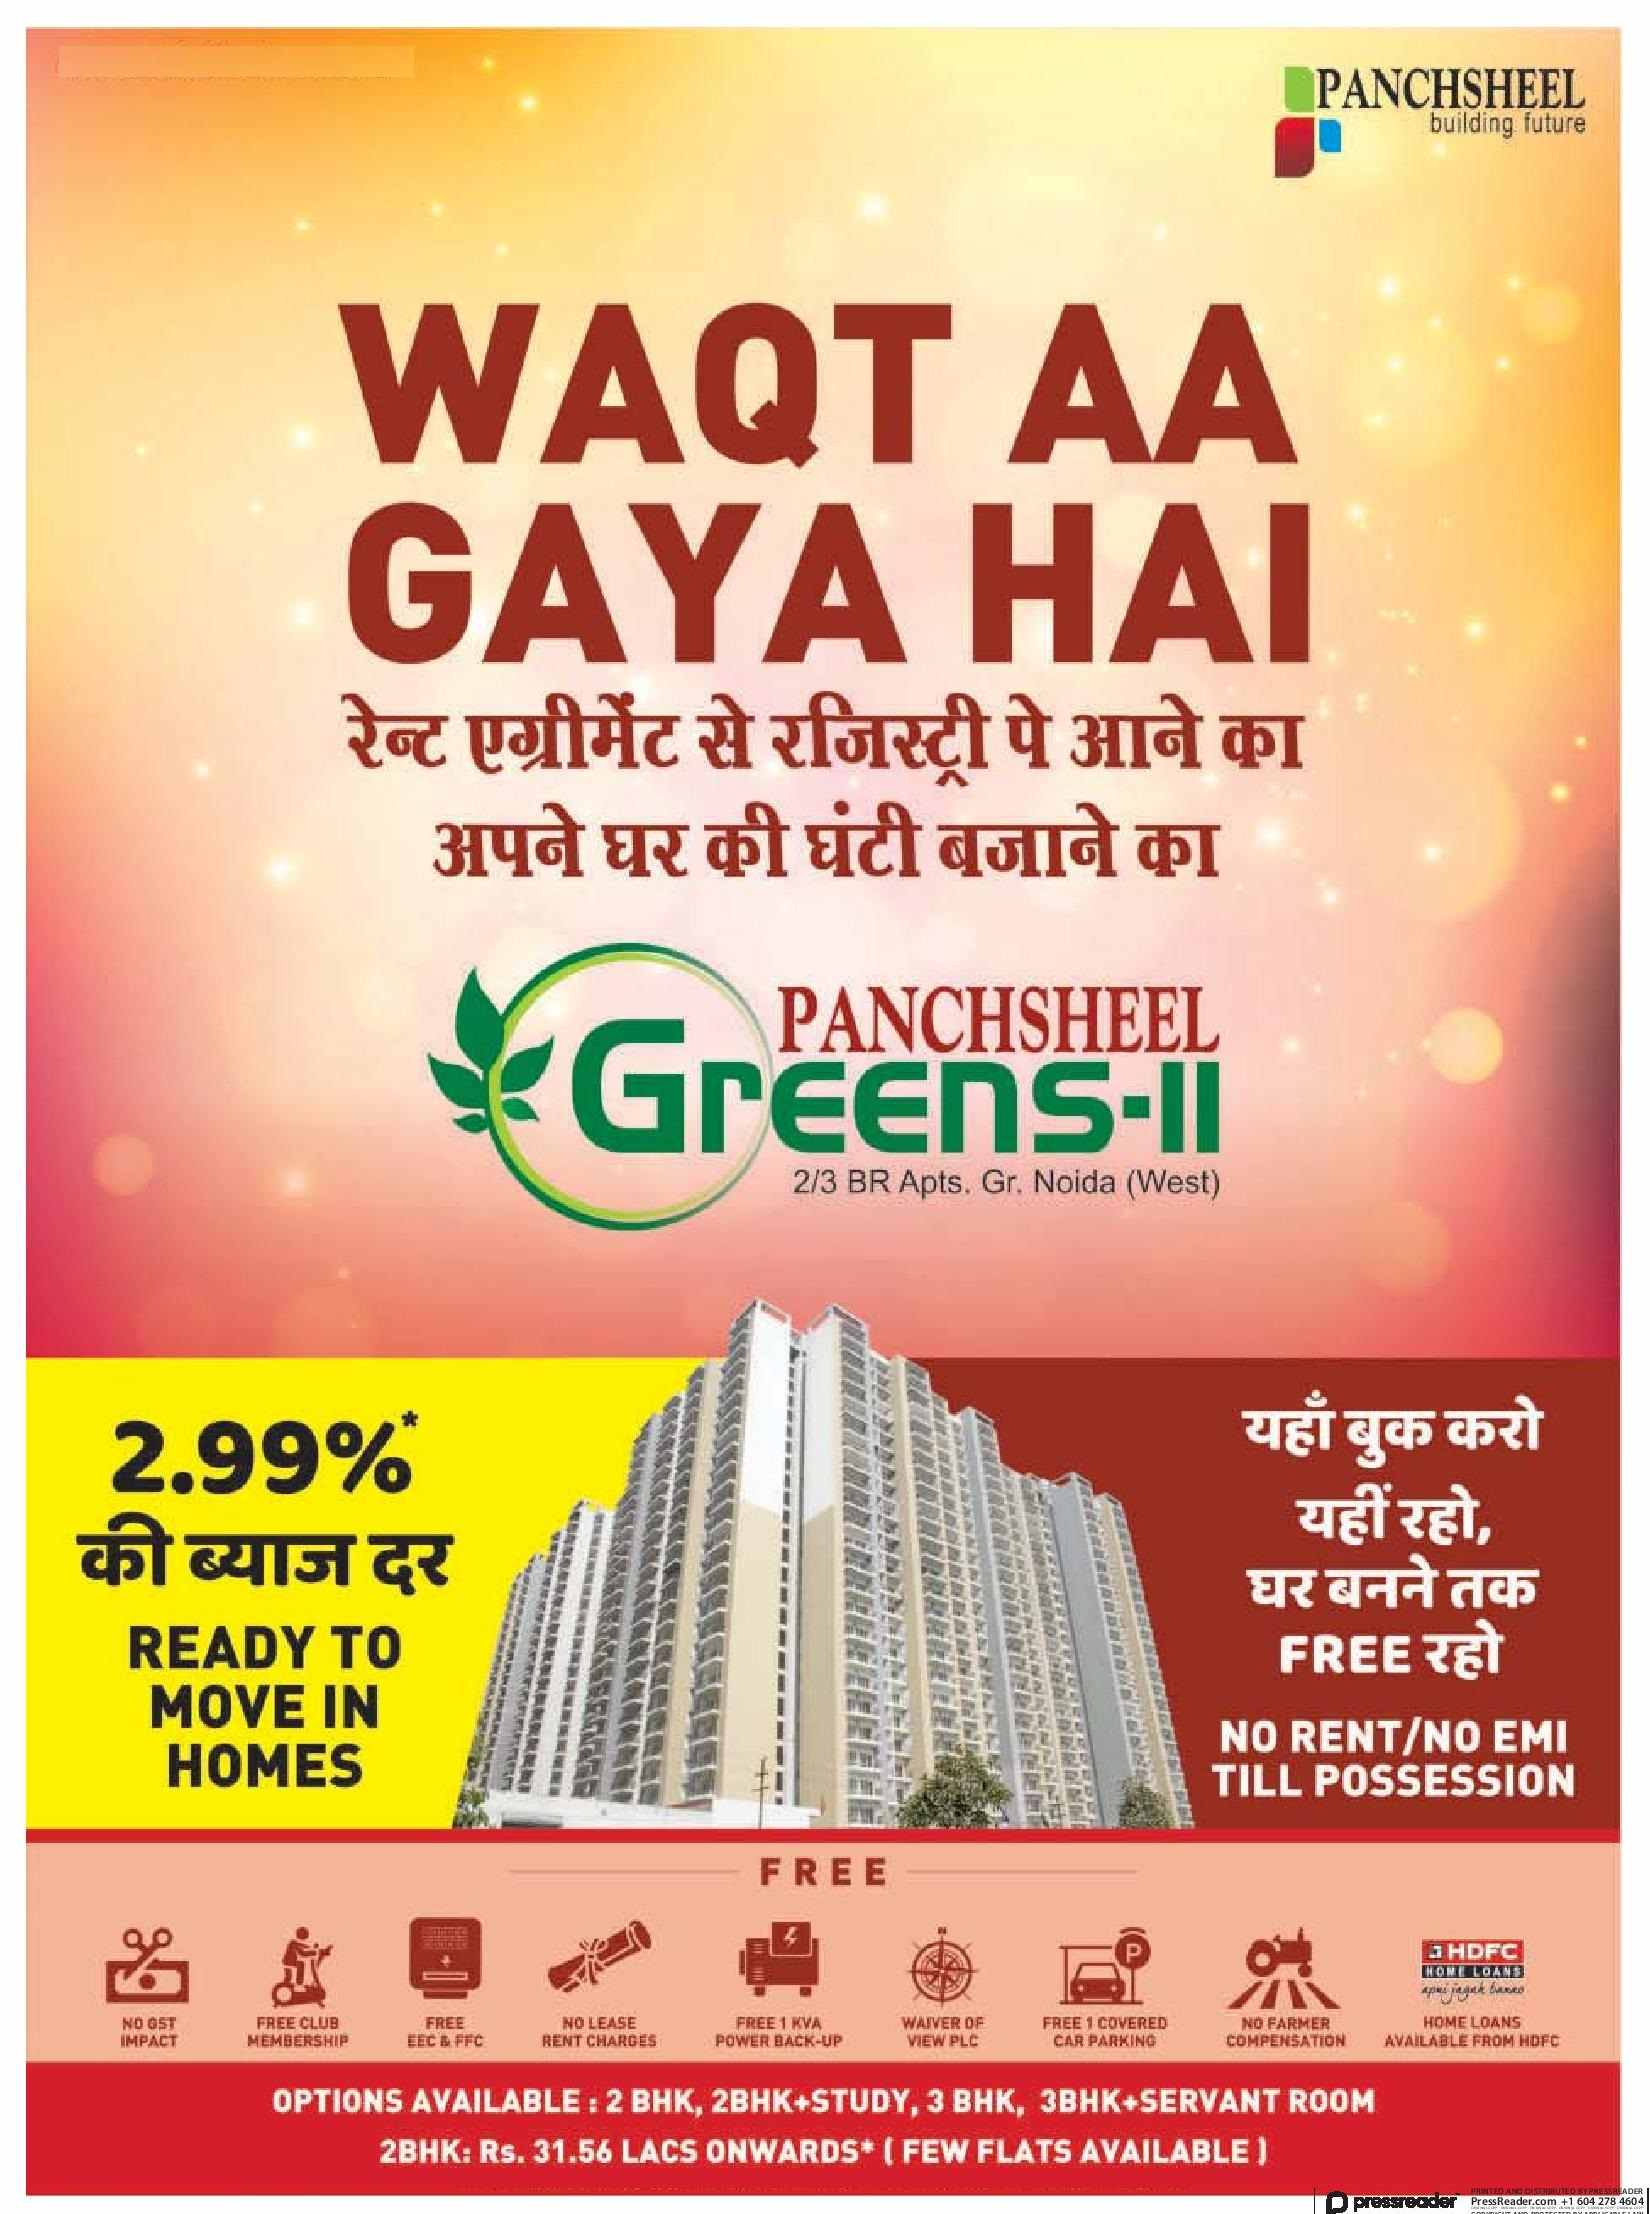 Pay no EMI & rent till possession at Panchsheel Greens II in Sector 16, Greater Noida